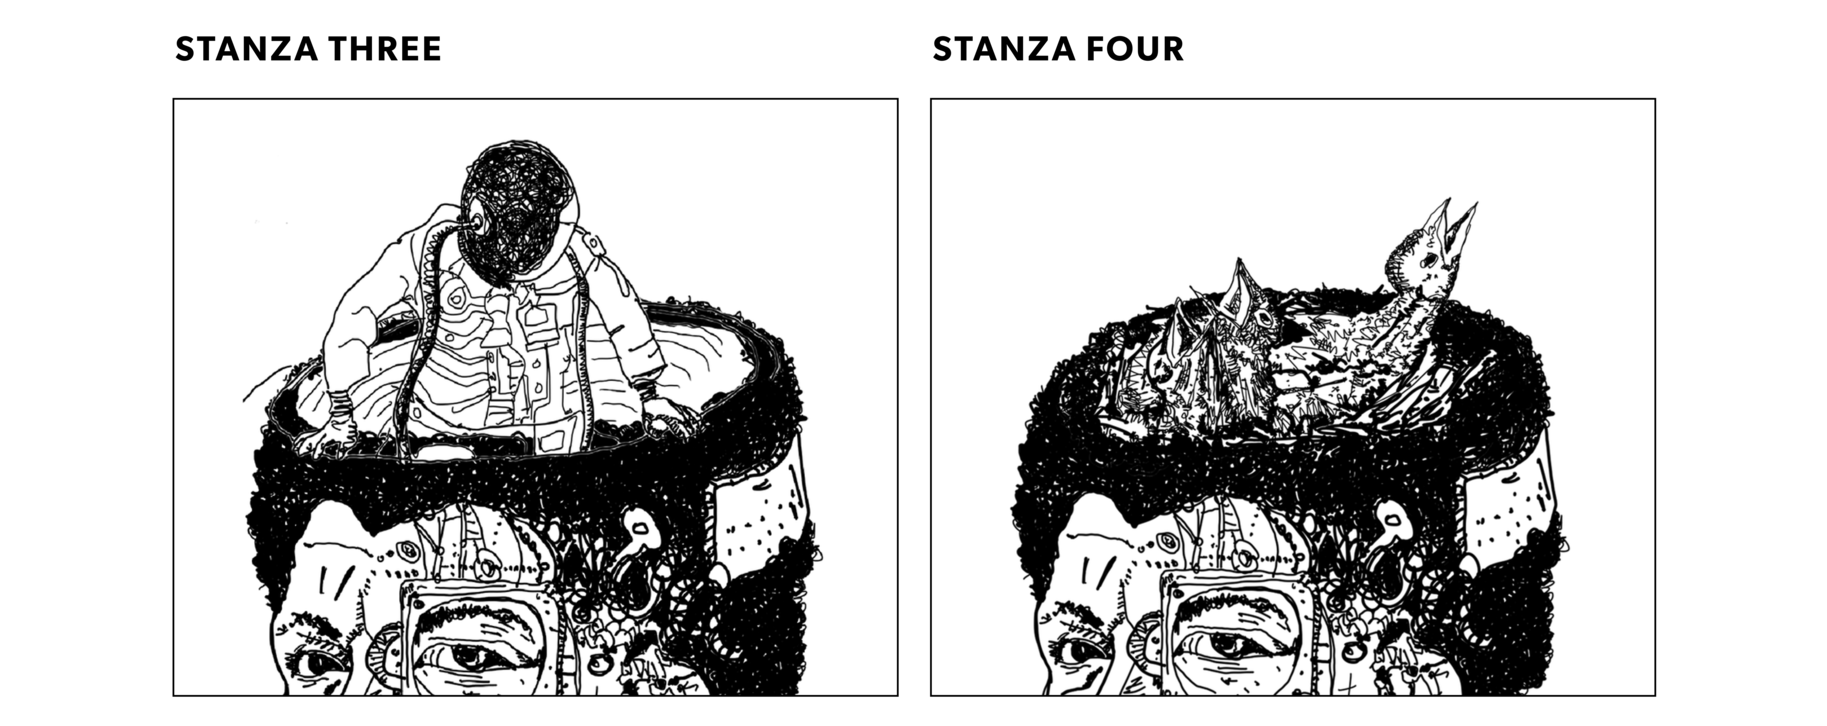 Drawings of Octavia Butler’s head. Stanza 3 is an astronaut climbing out of it. Stanza 4 shows baby birds in a nest on top.